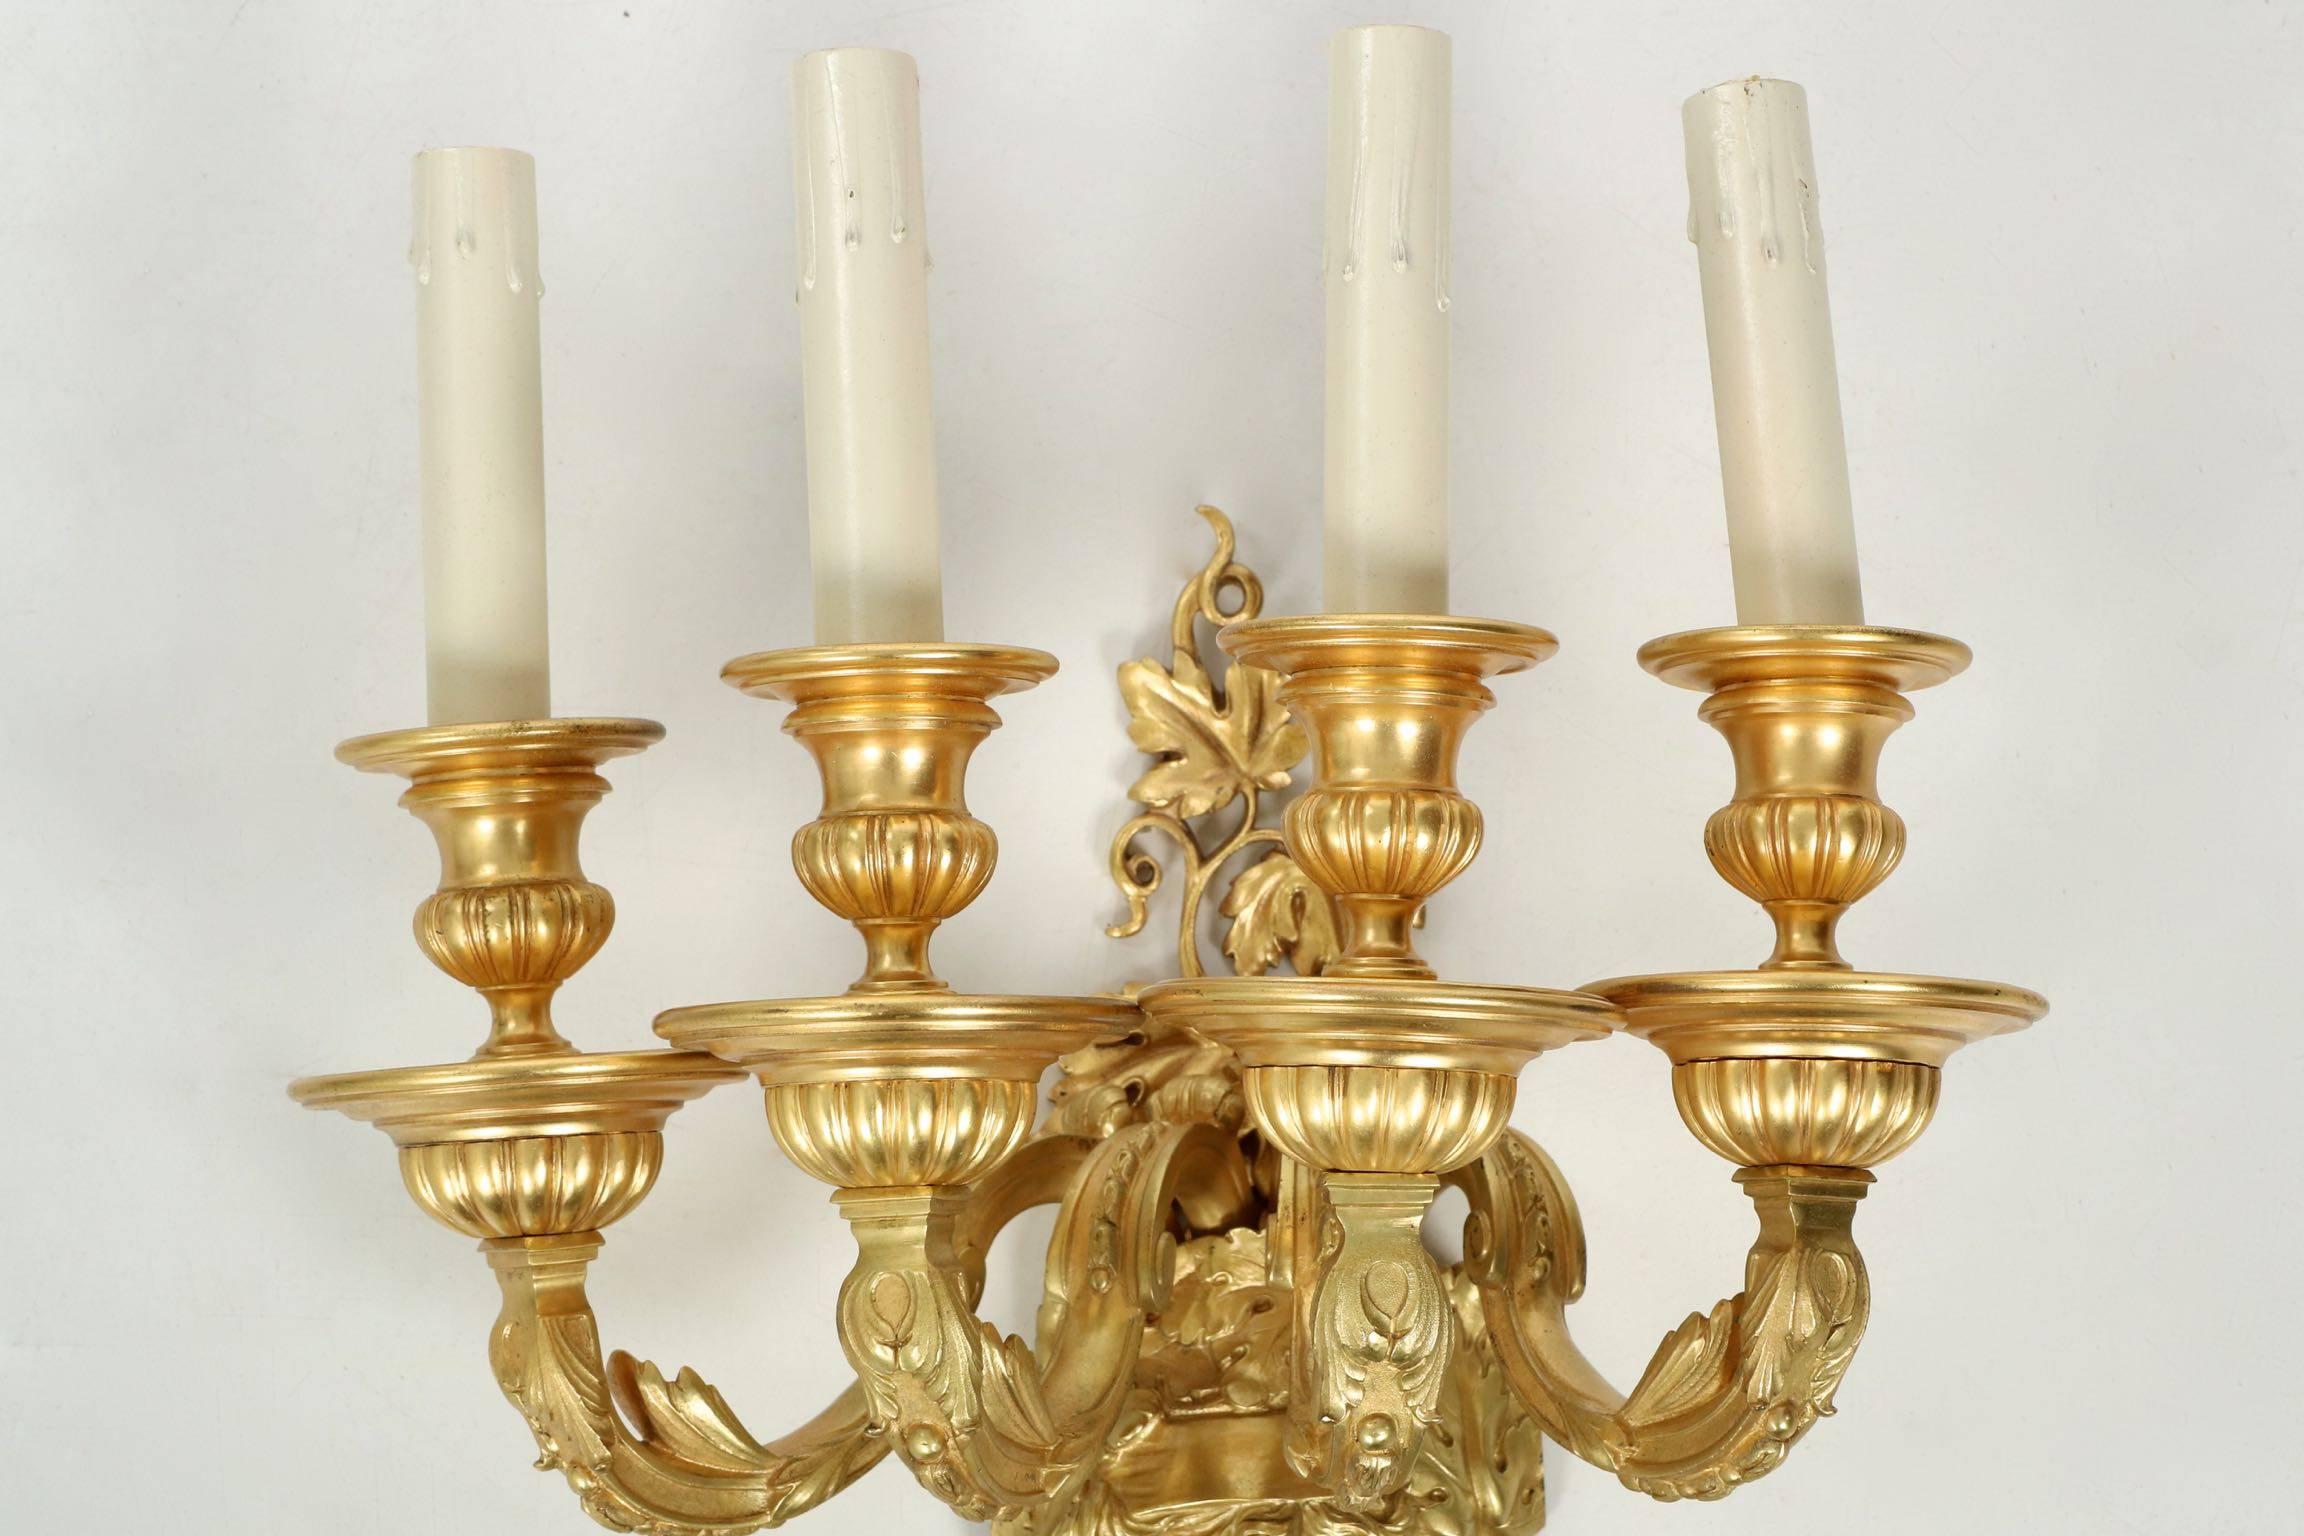 Excellent Pair of Mitchell, Vance & Co Gilt Bronze Four-Light Wall Sconce Lamps 1